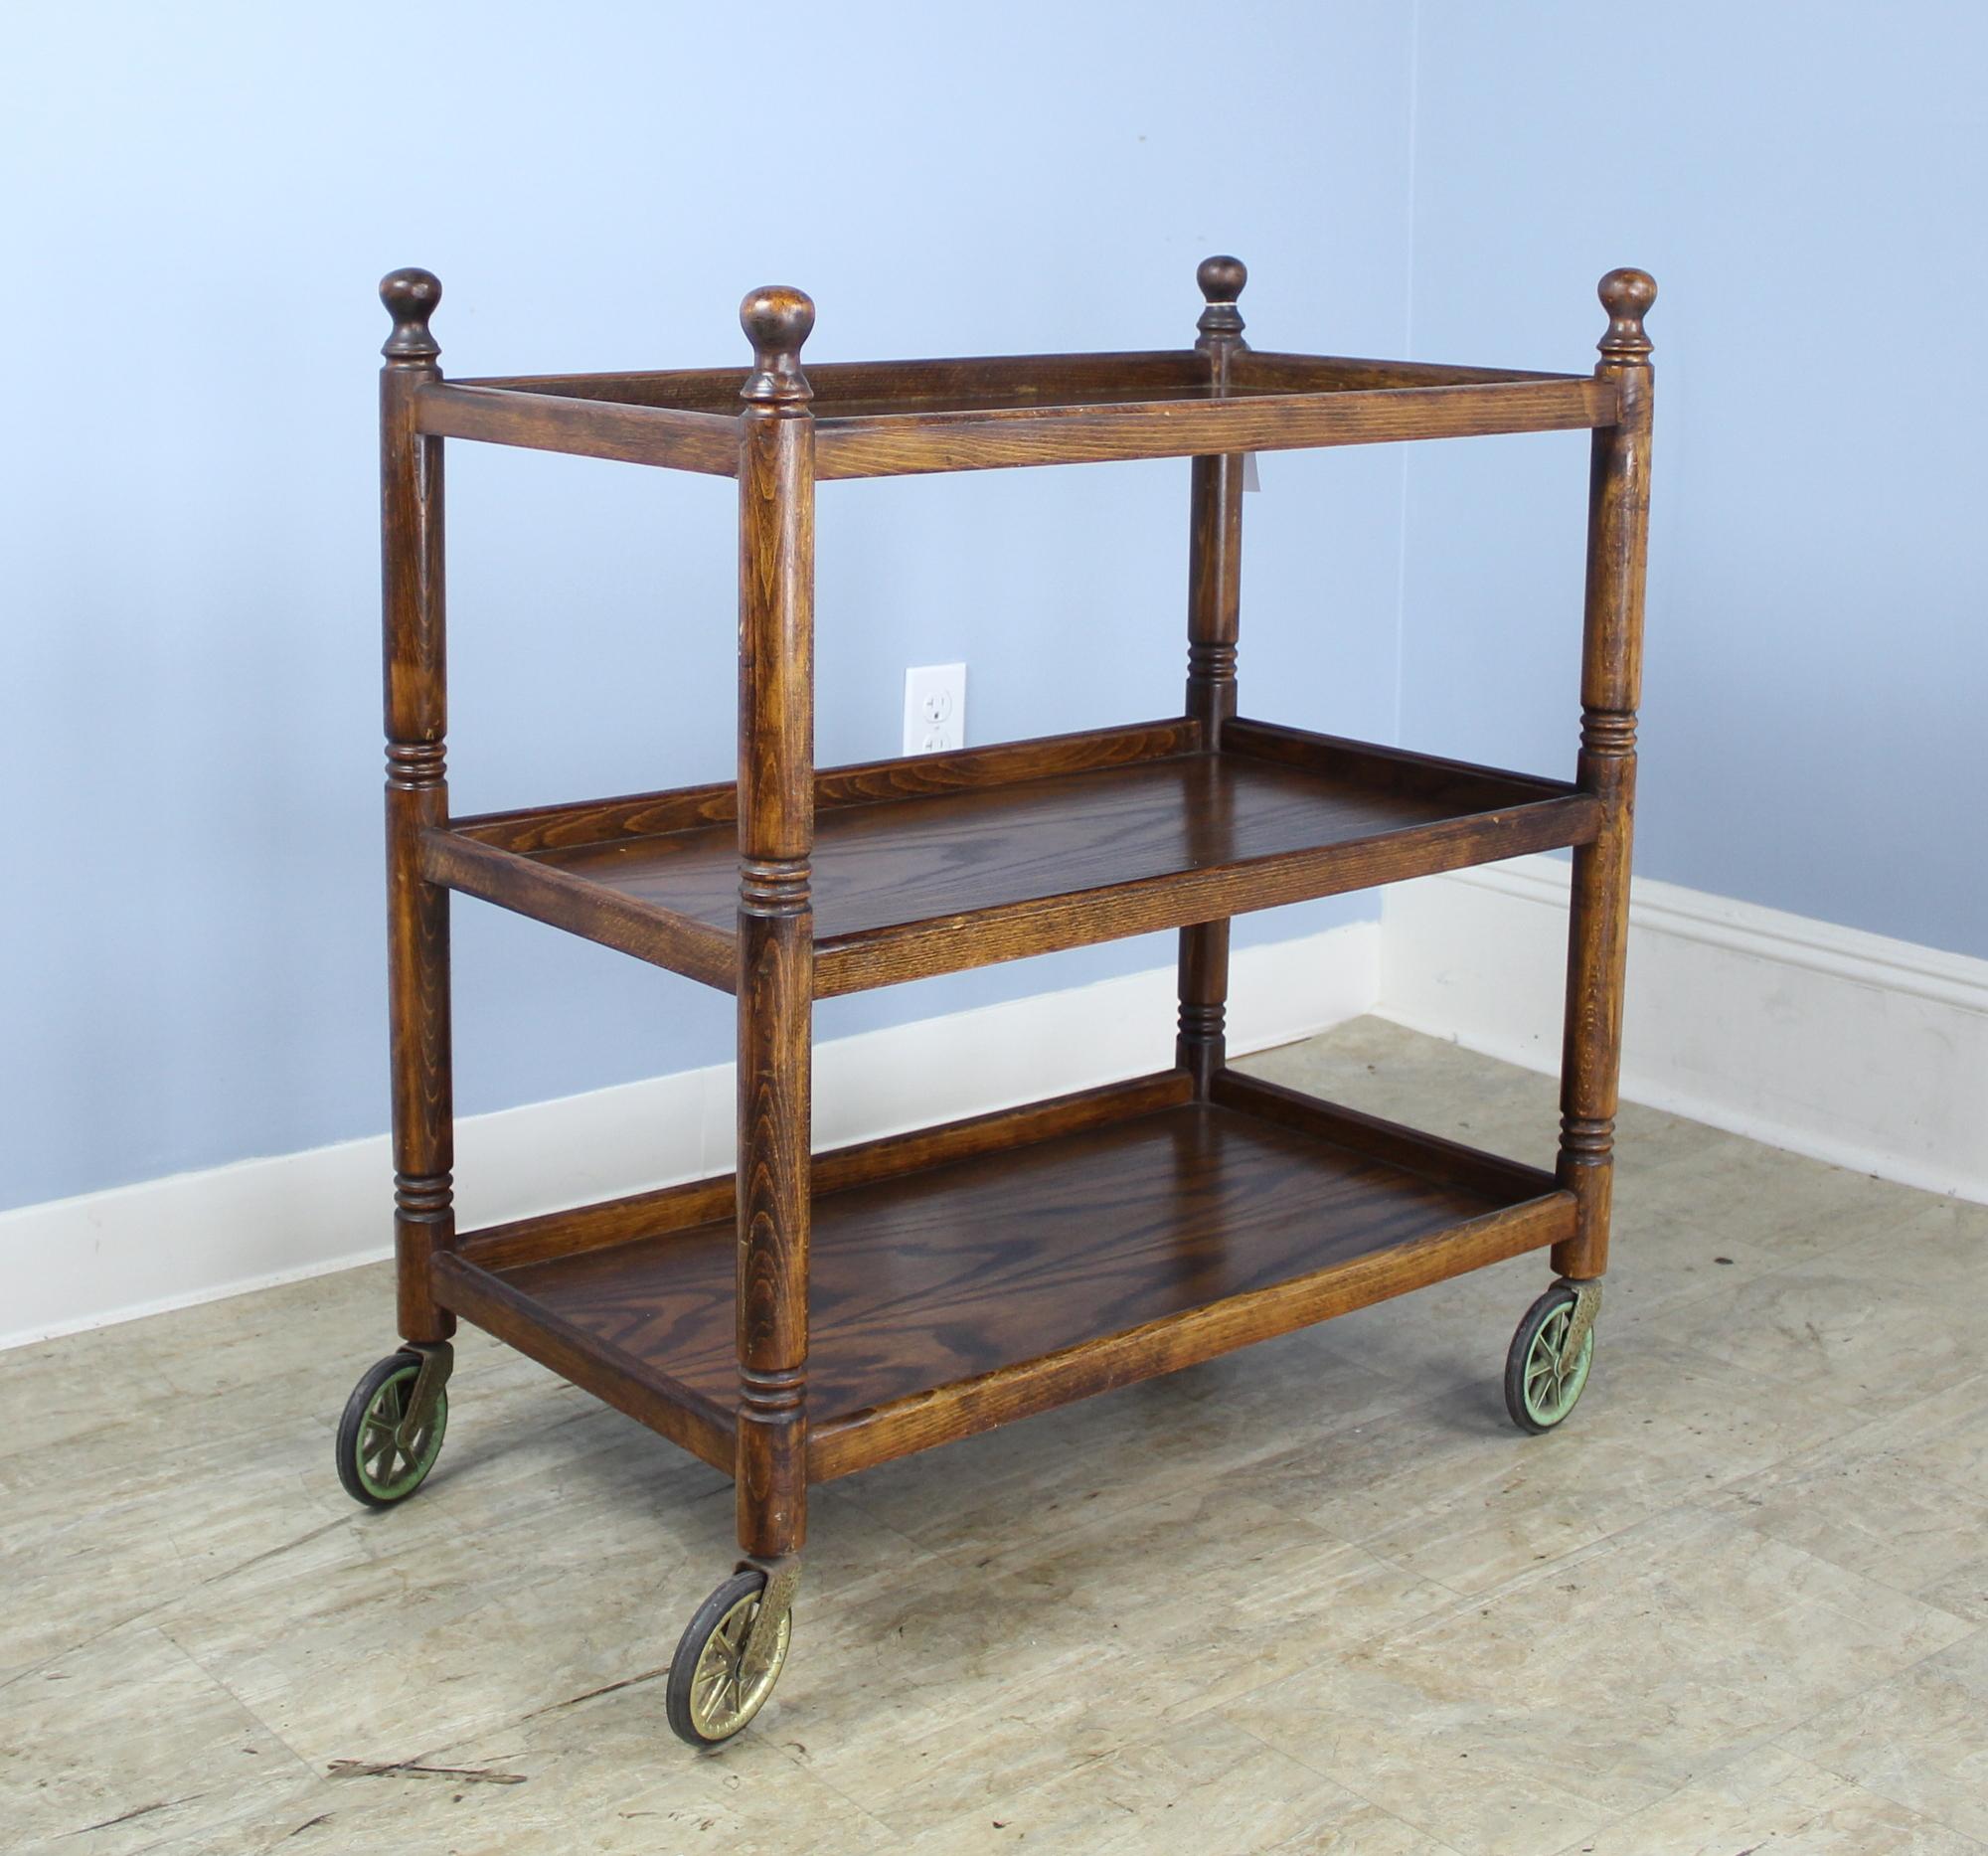 Charming three-tier bar cart. Rich dark oak, with decorative turned legs with small rounded tops. Original castors. There are 11